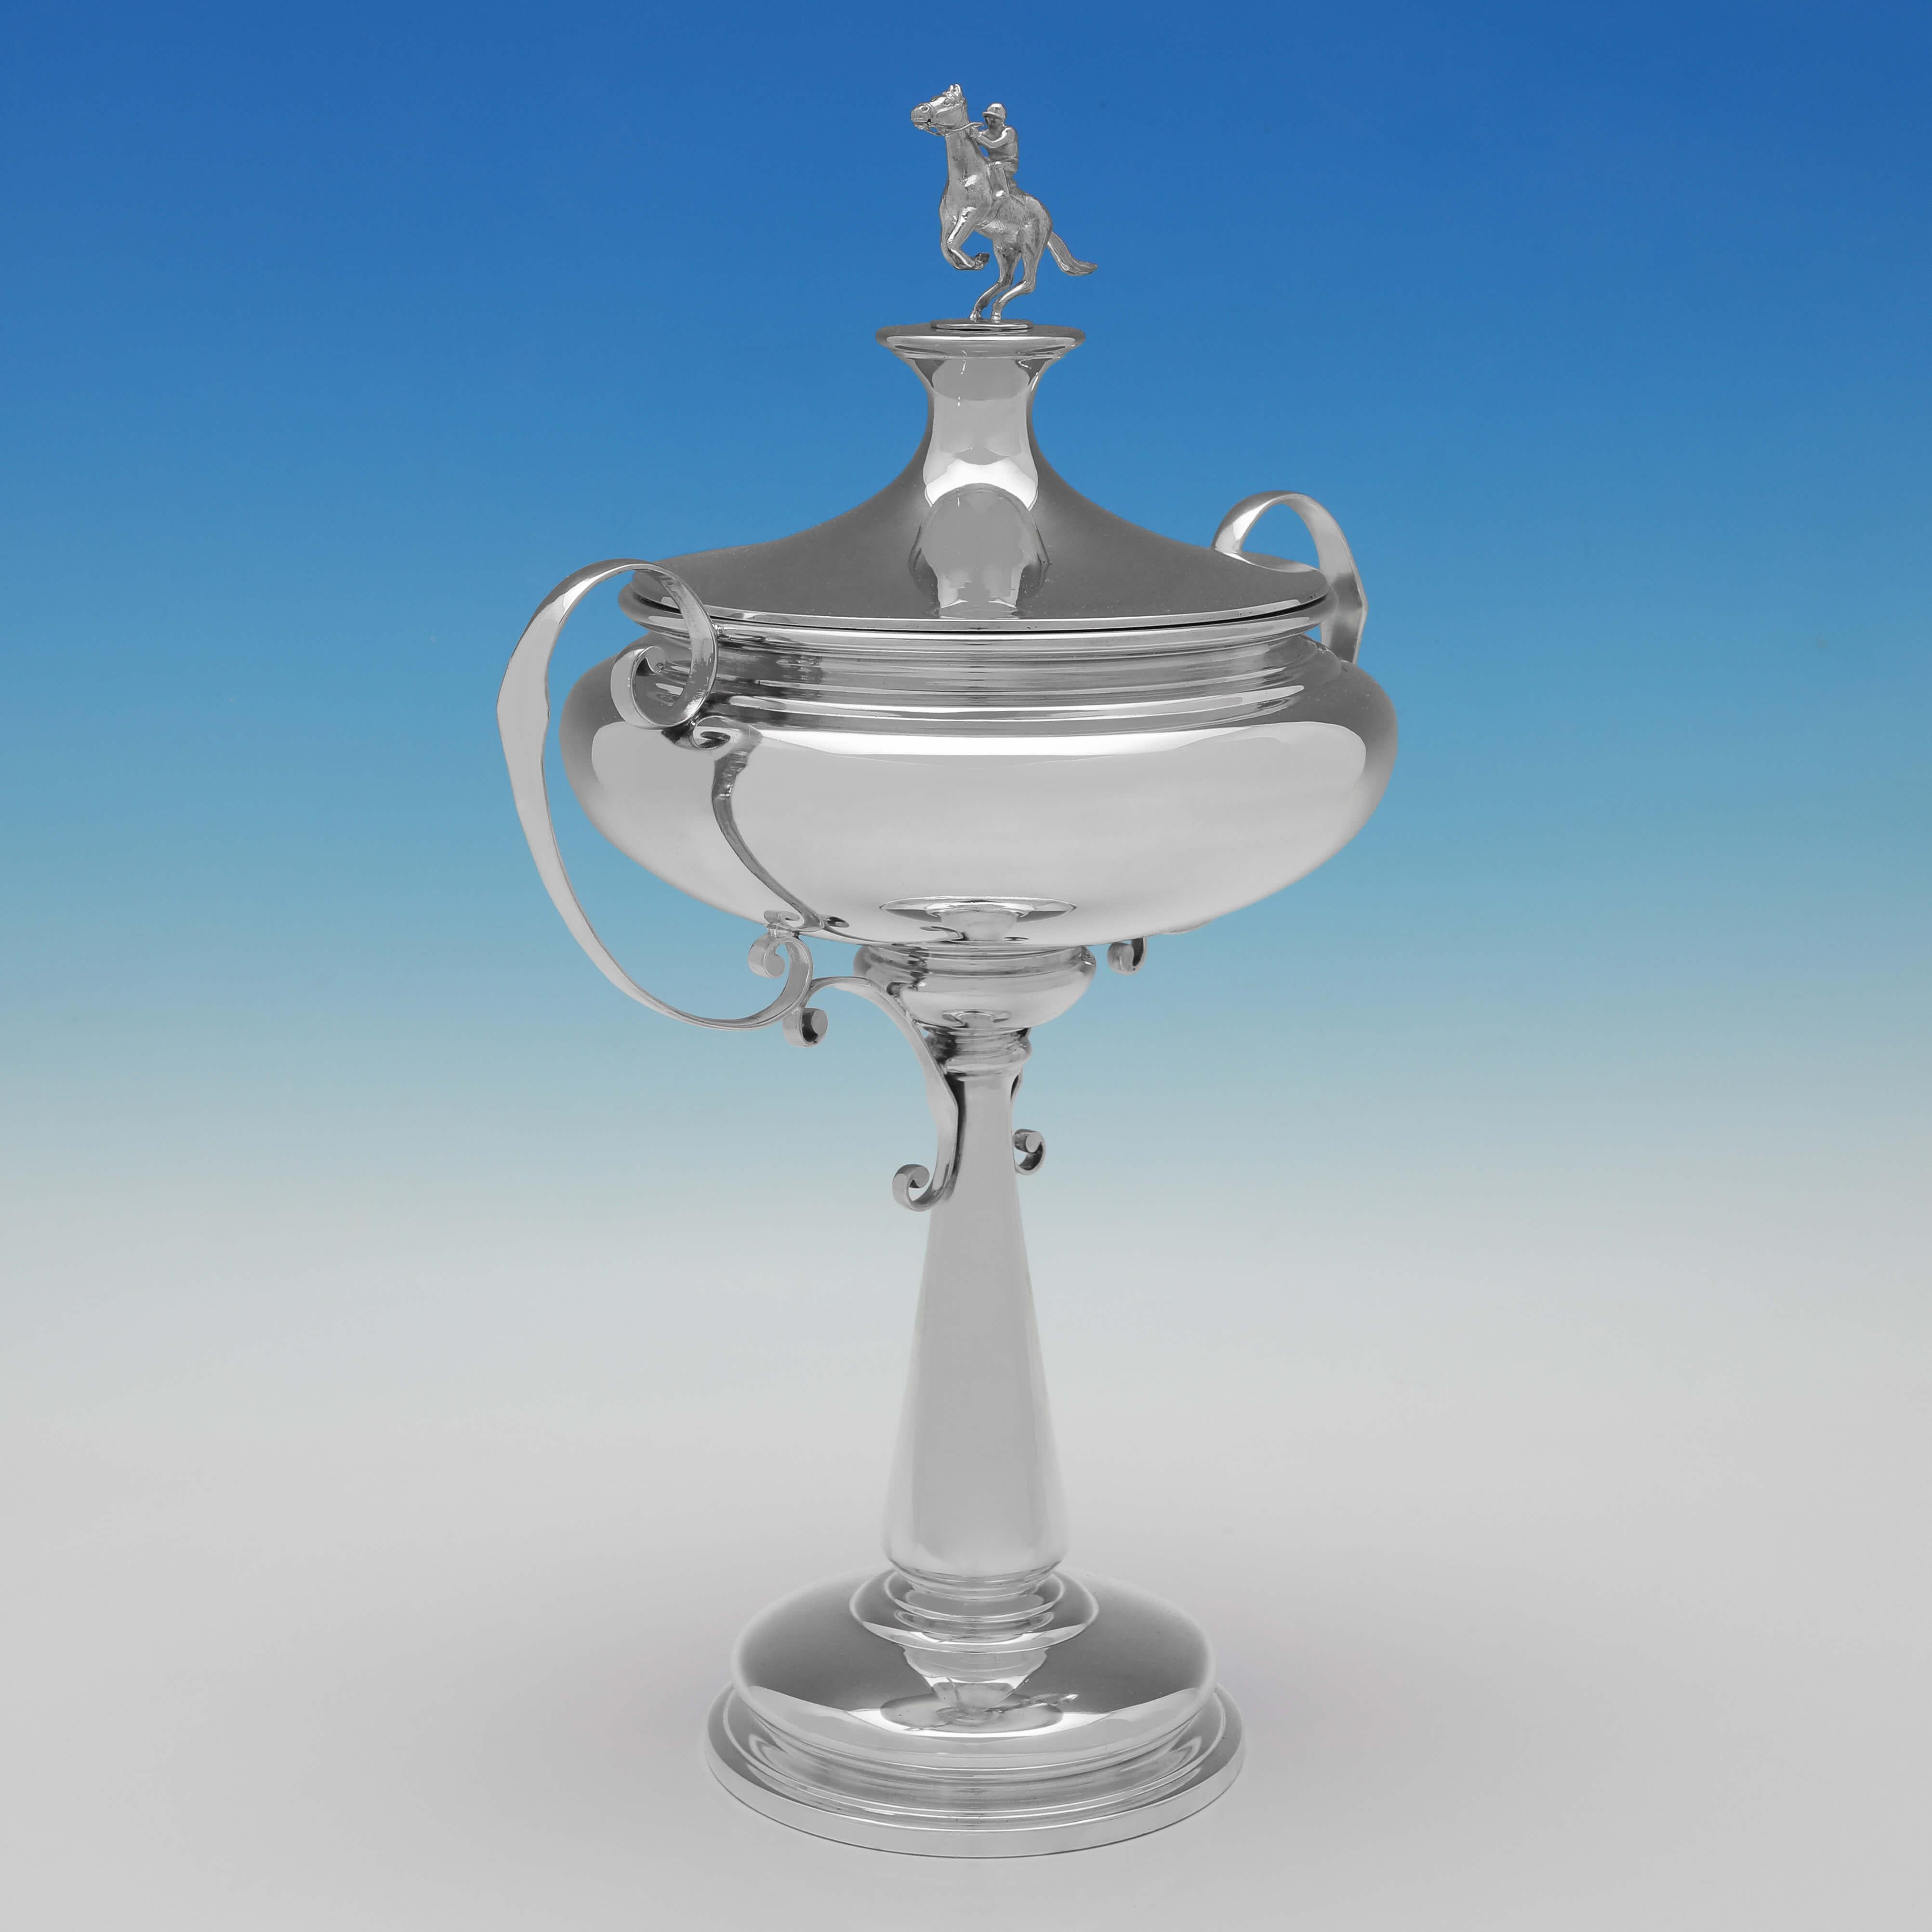 Hallmarked in Sheffield in 1925 by Walker & Hall, this handsome, Sterling Silver Trophy Cup, features scroll handles, and a horse and jockey finial. 

The trophy measures 15